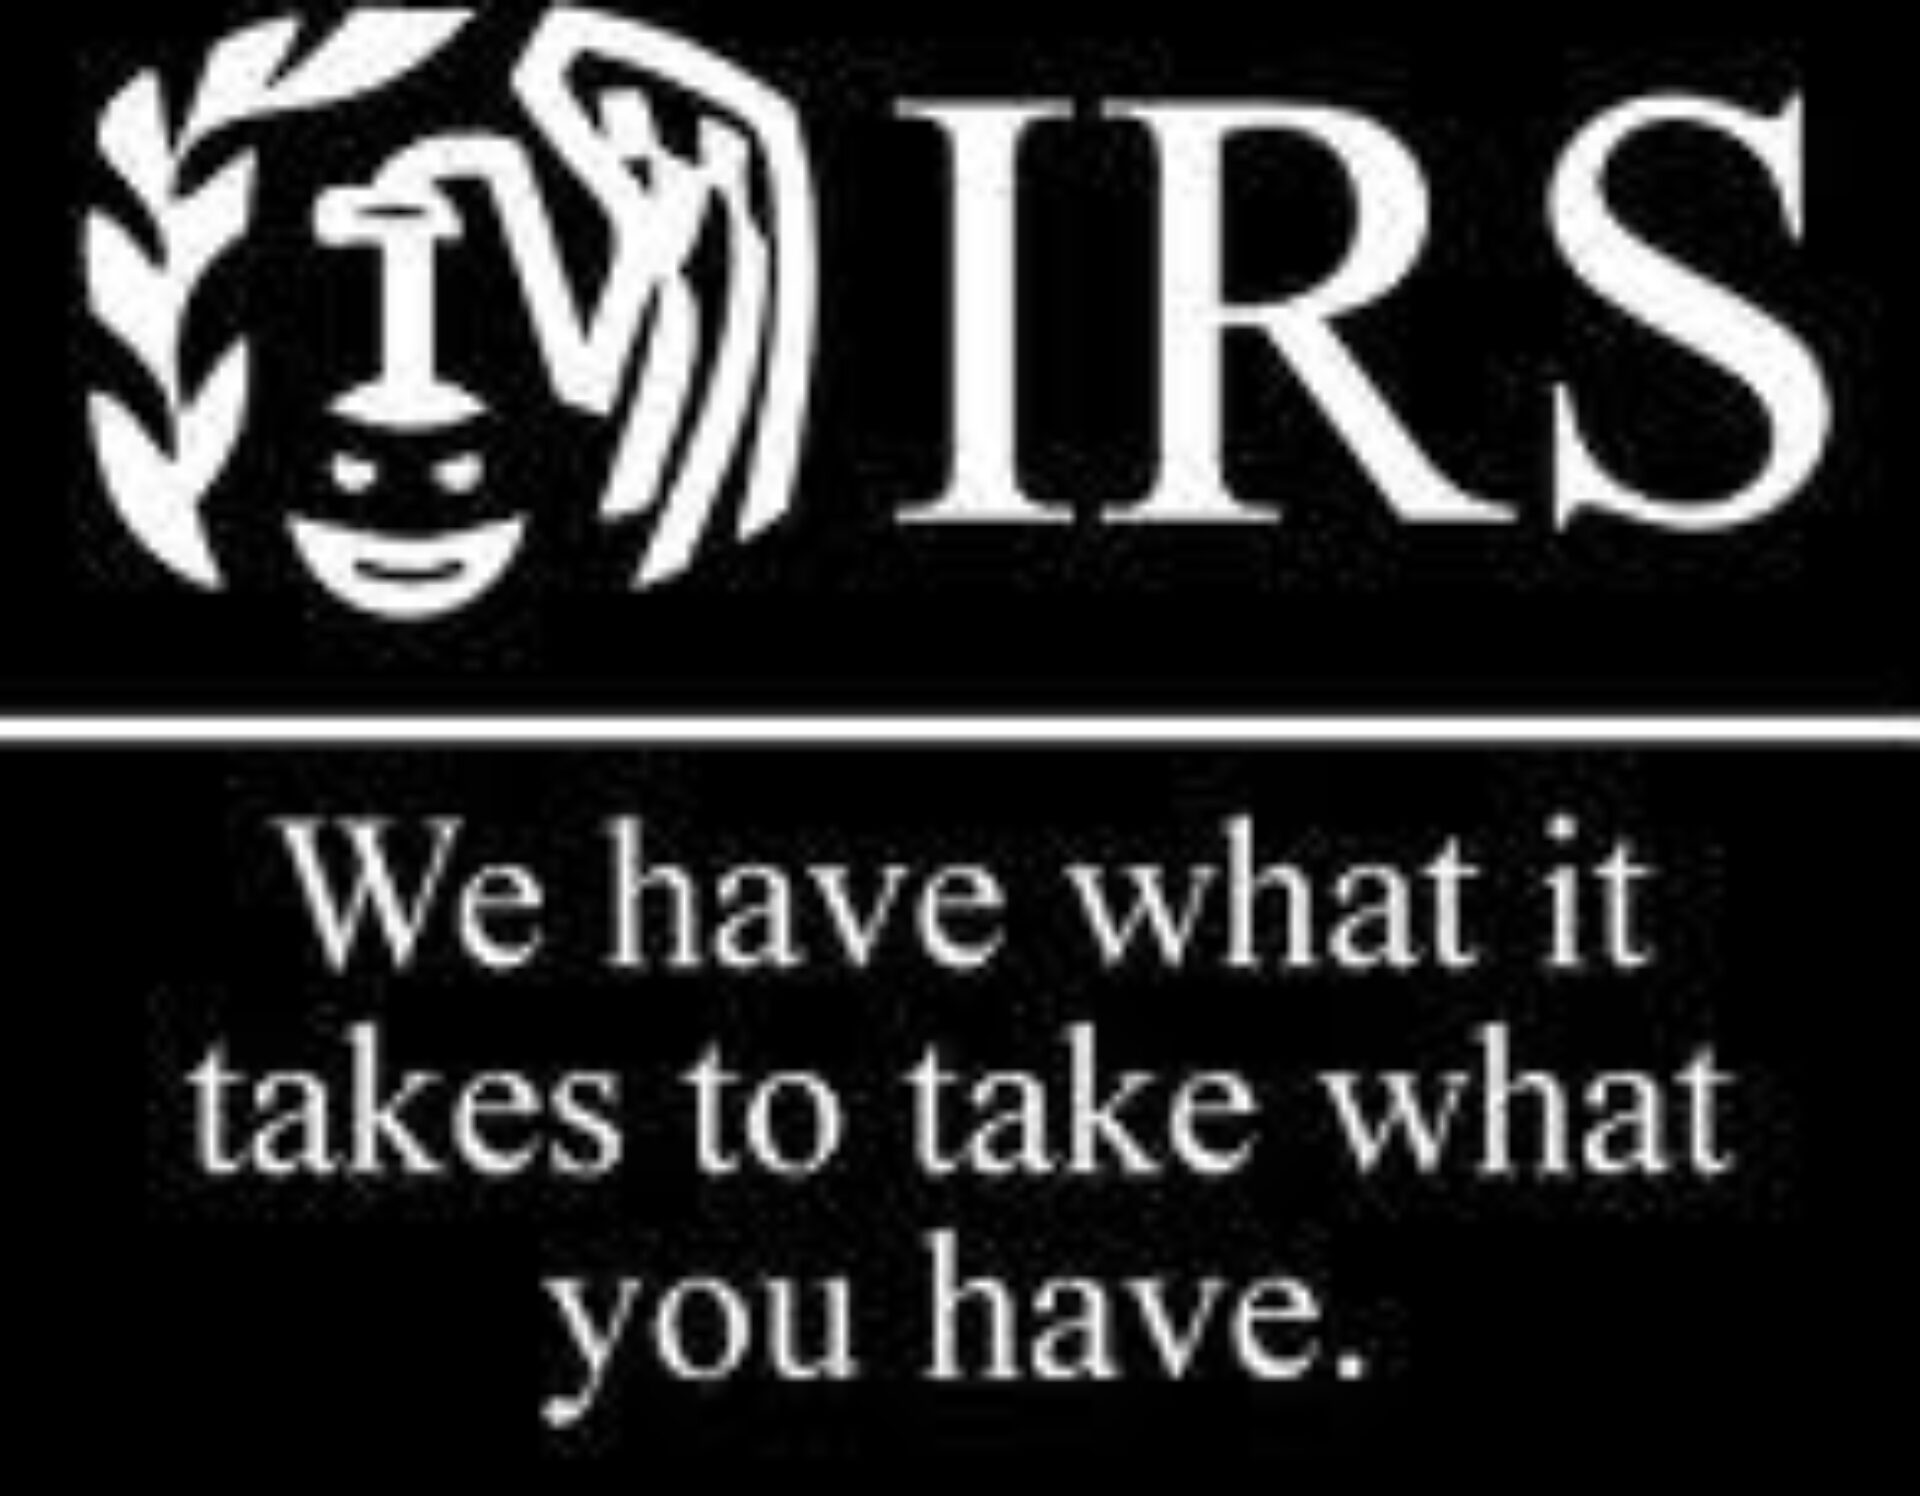 Update to Previous IRS Announcements